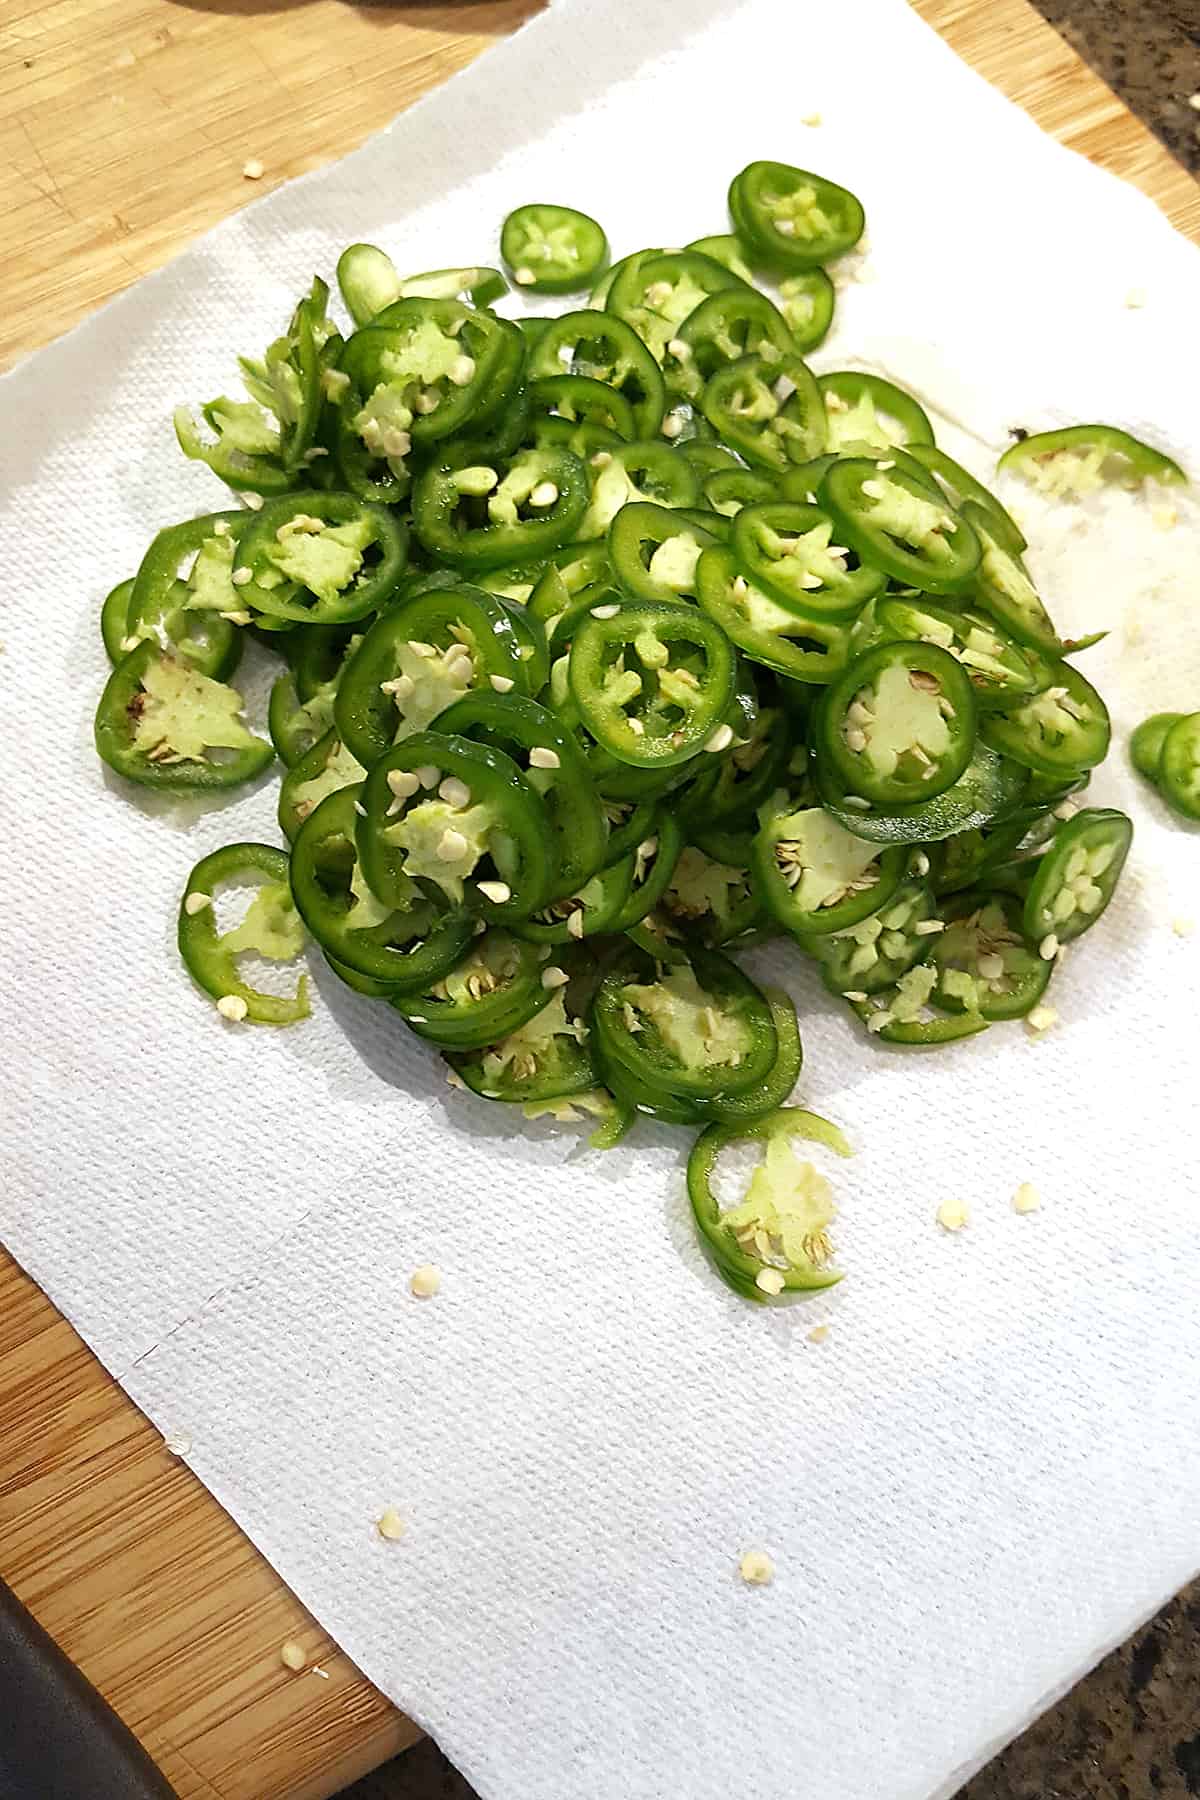 Thinly sliced jalapeno pepper rings on a paper towel.